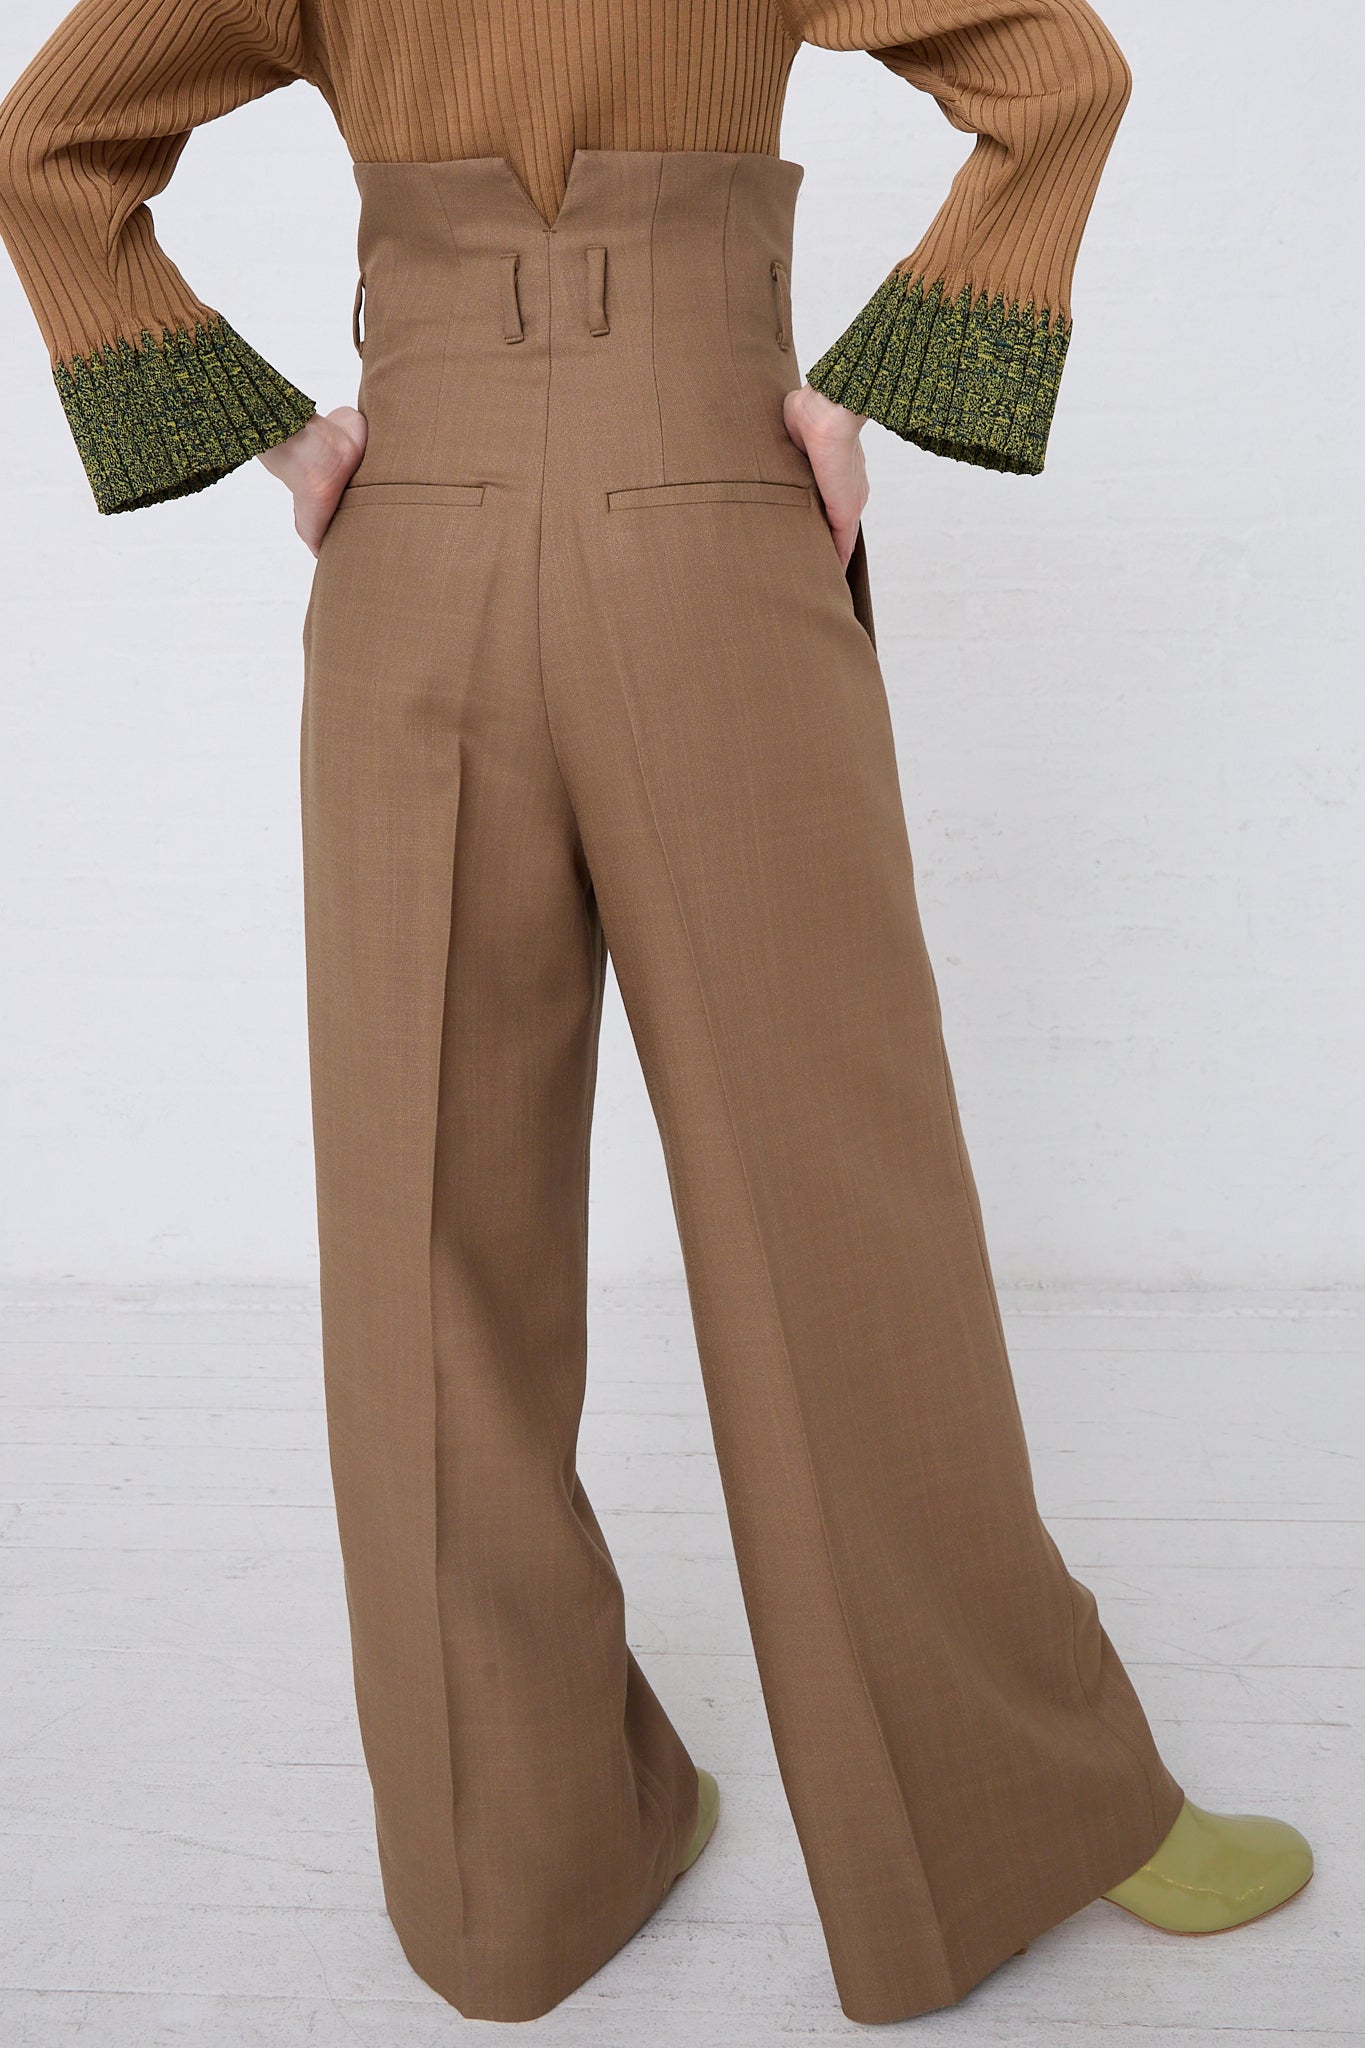 A person wearing high-waist TOGA ARCHIVES trousers in brown.